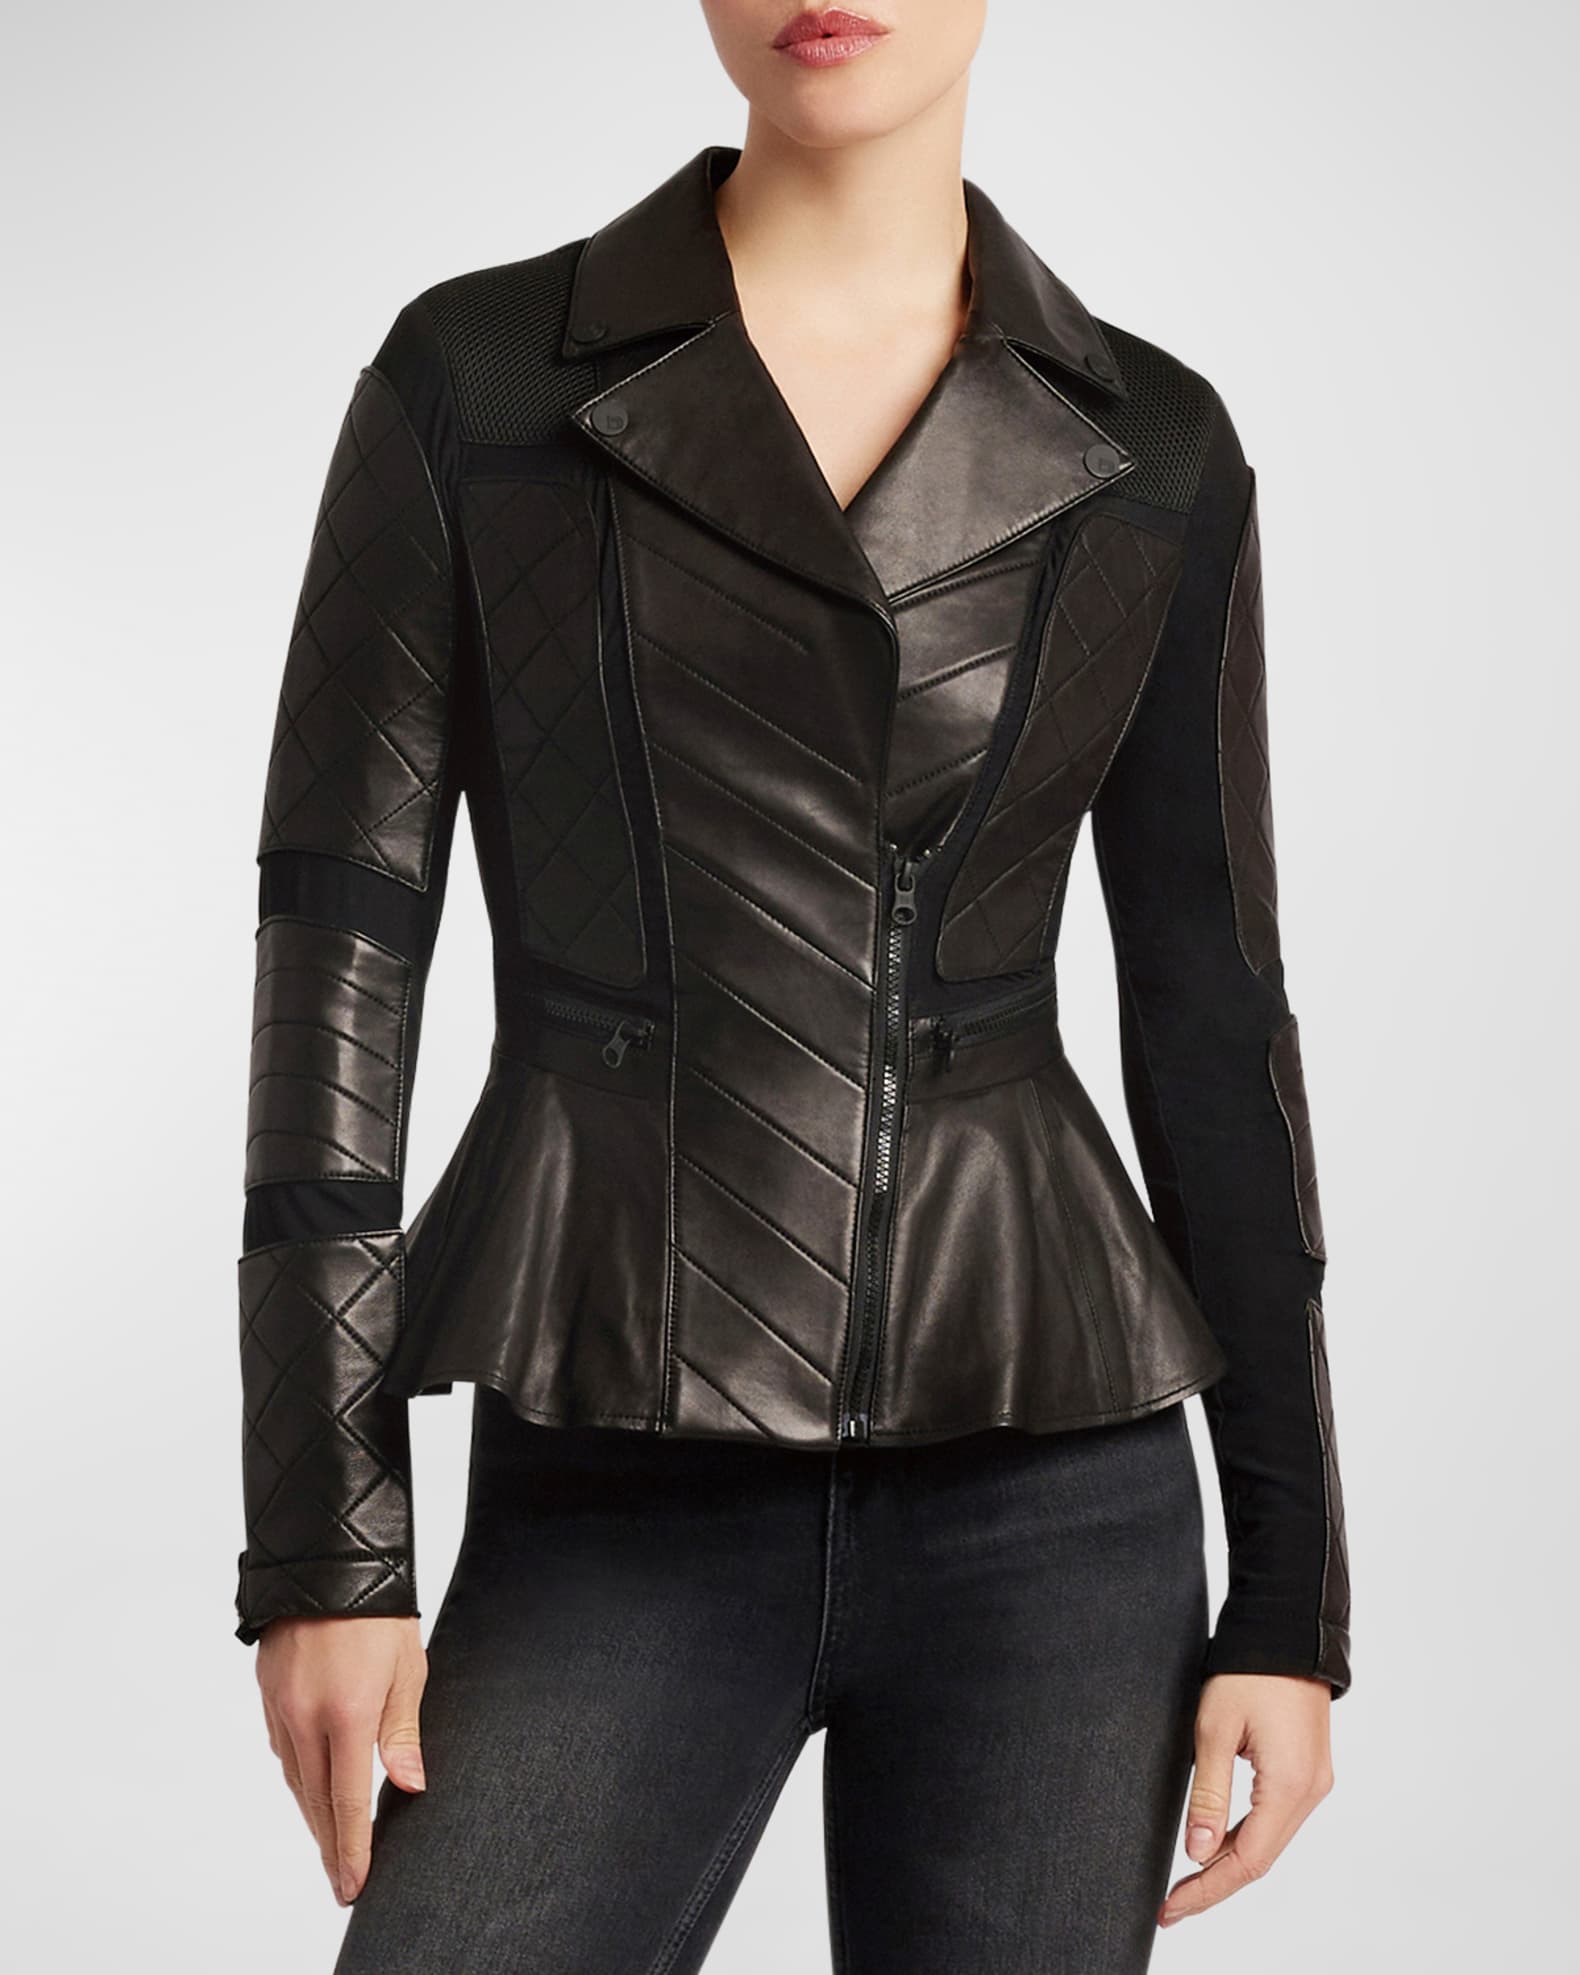 Blanc Noir Quilted Bomber Jacket with Mesh-Inset